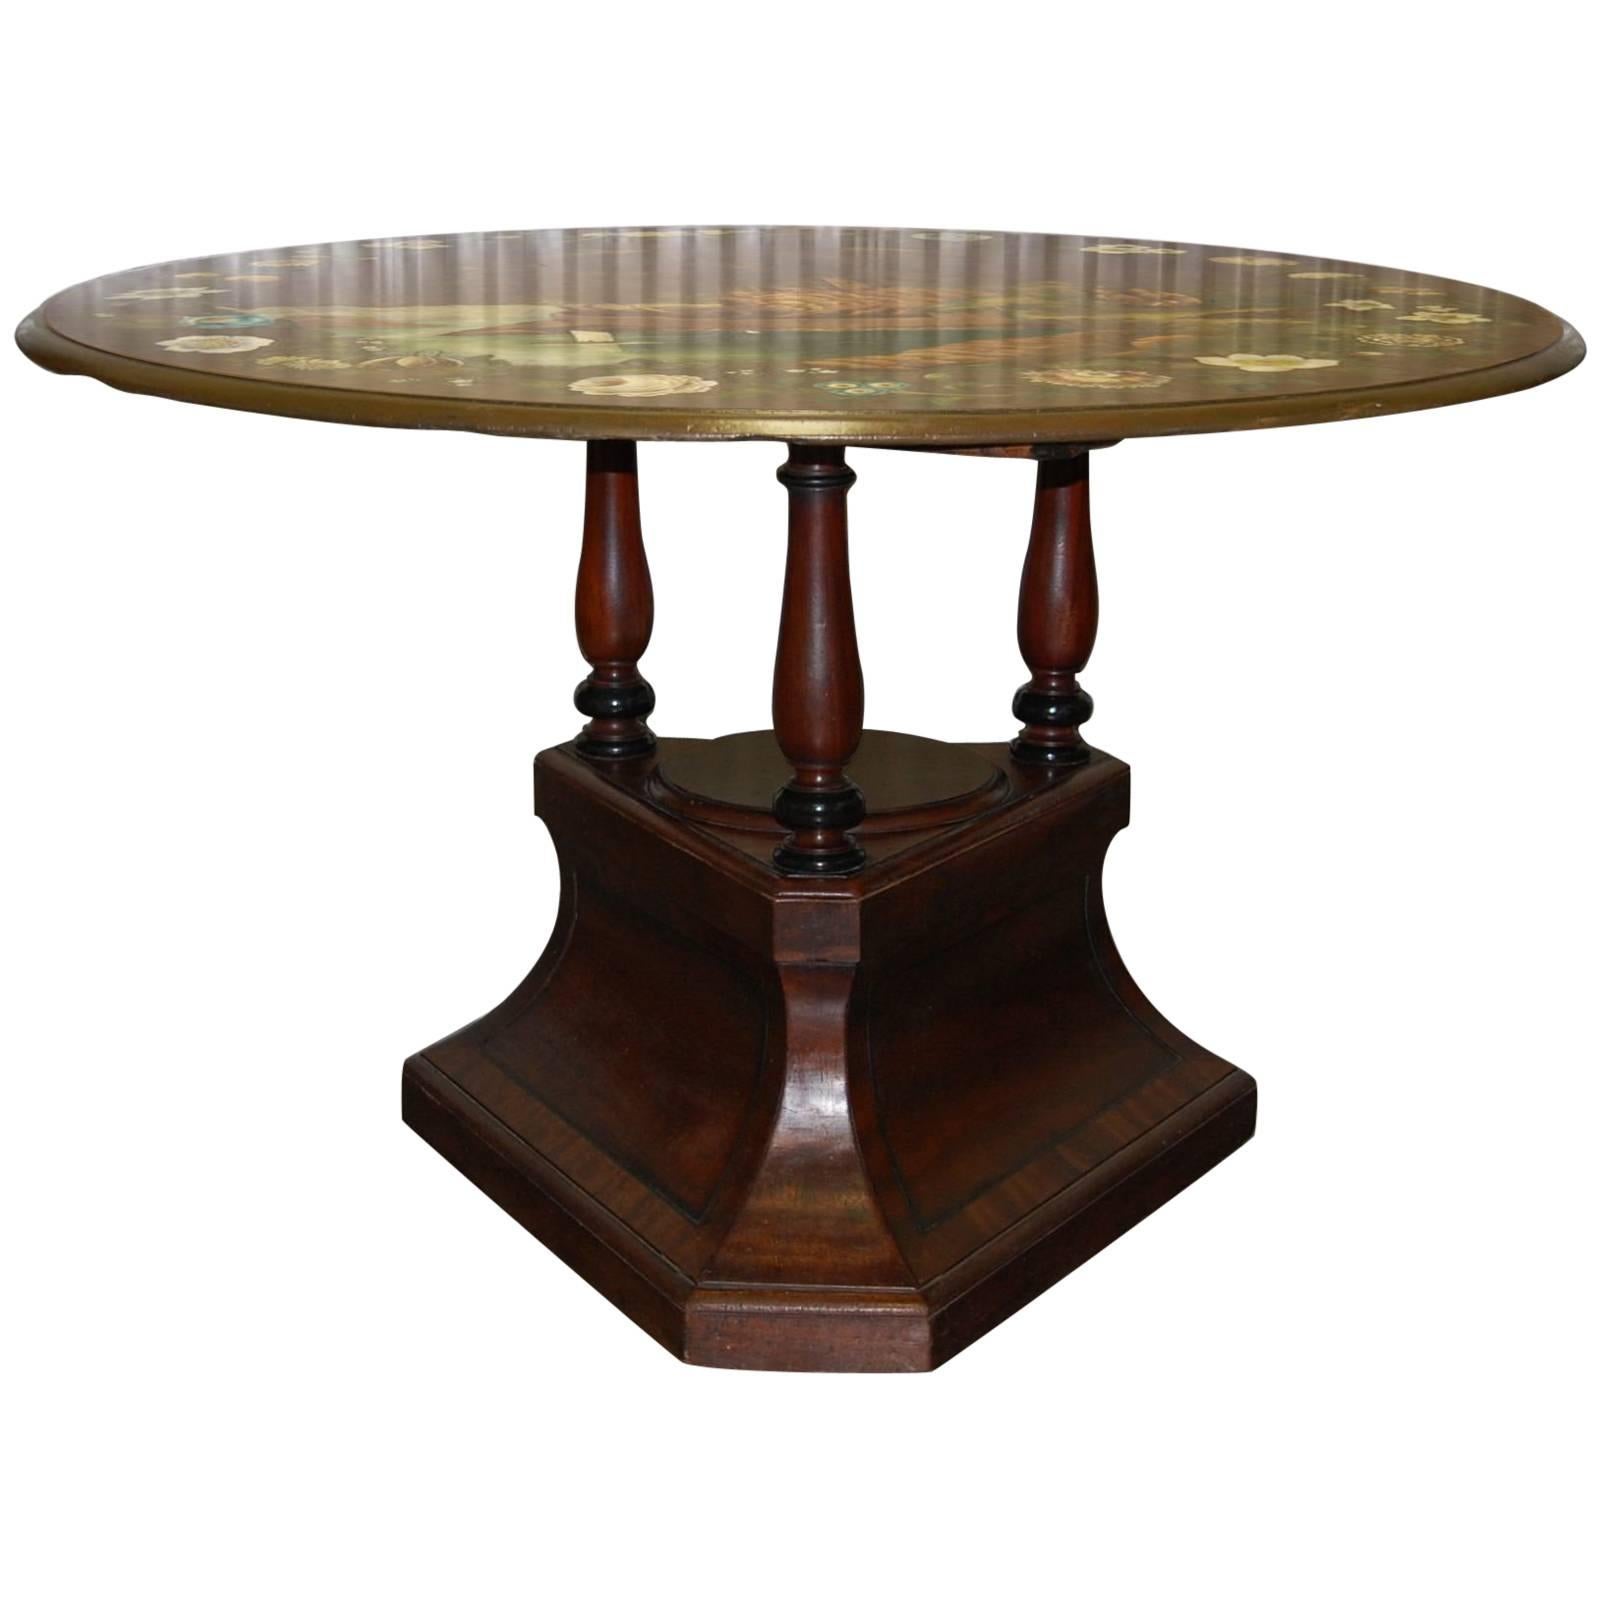 Early 19th Century Mahogany Pedestal Base Table with Original Painted Slate Top For Sale